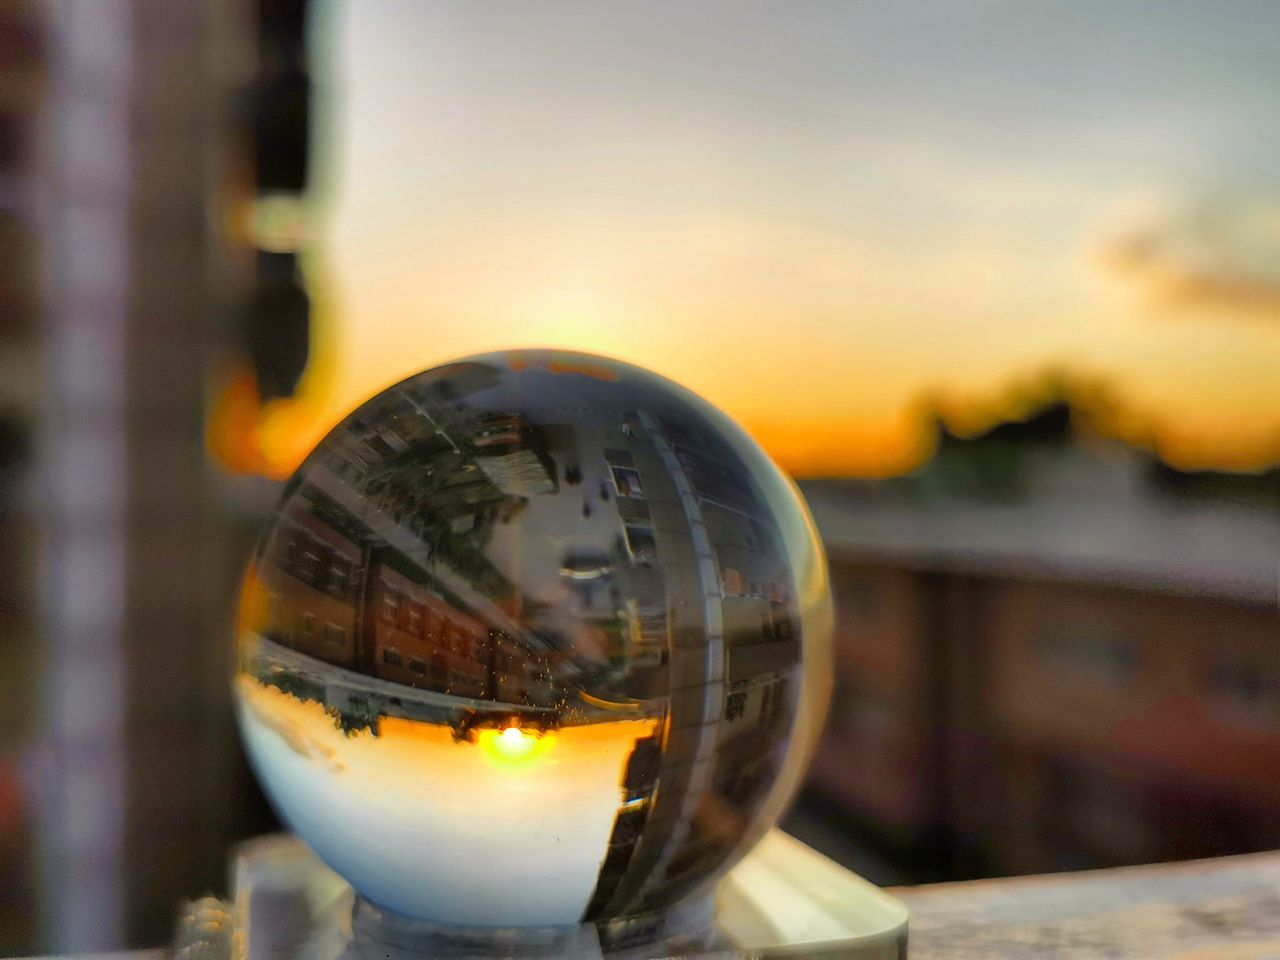 CLOSE-UP OF ILLUMINATED CRYSTAL BALL AGAINST BUILDING